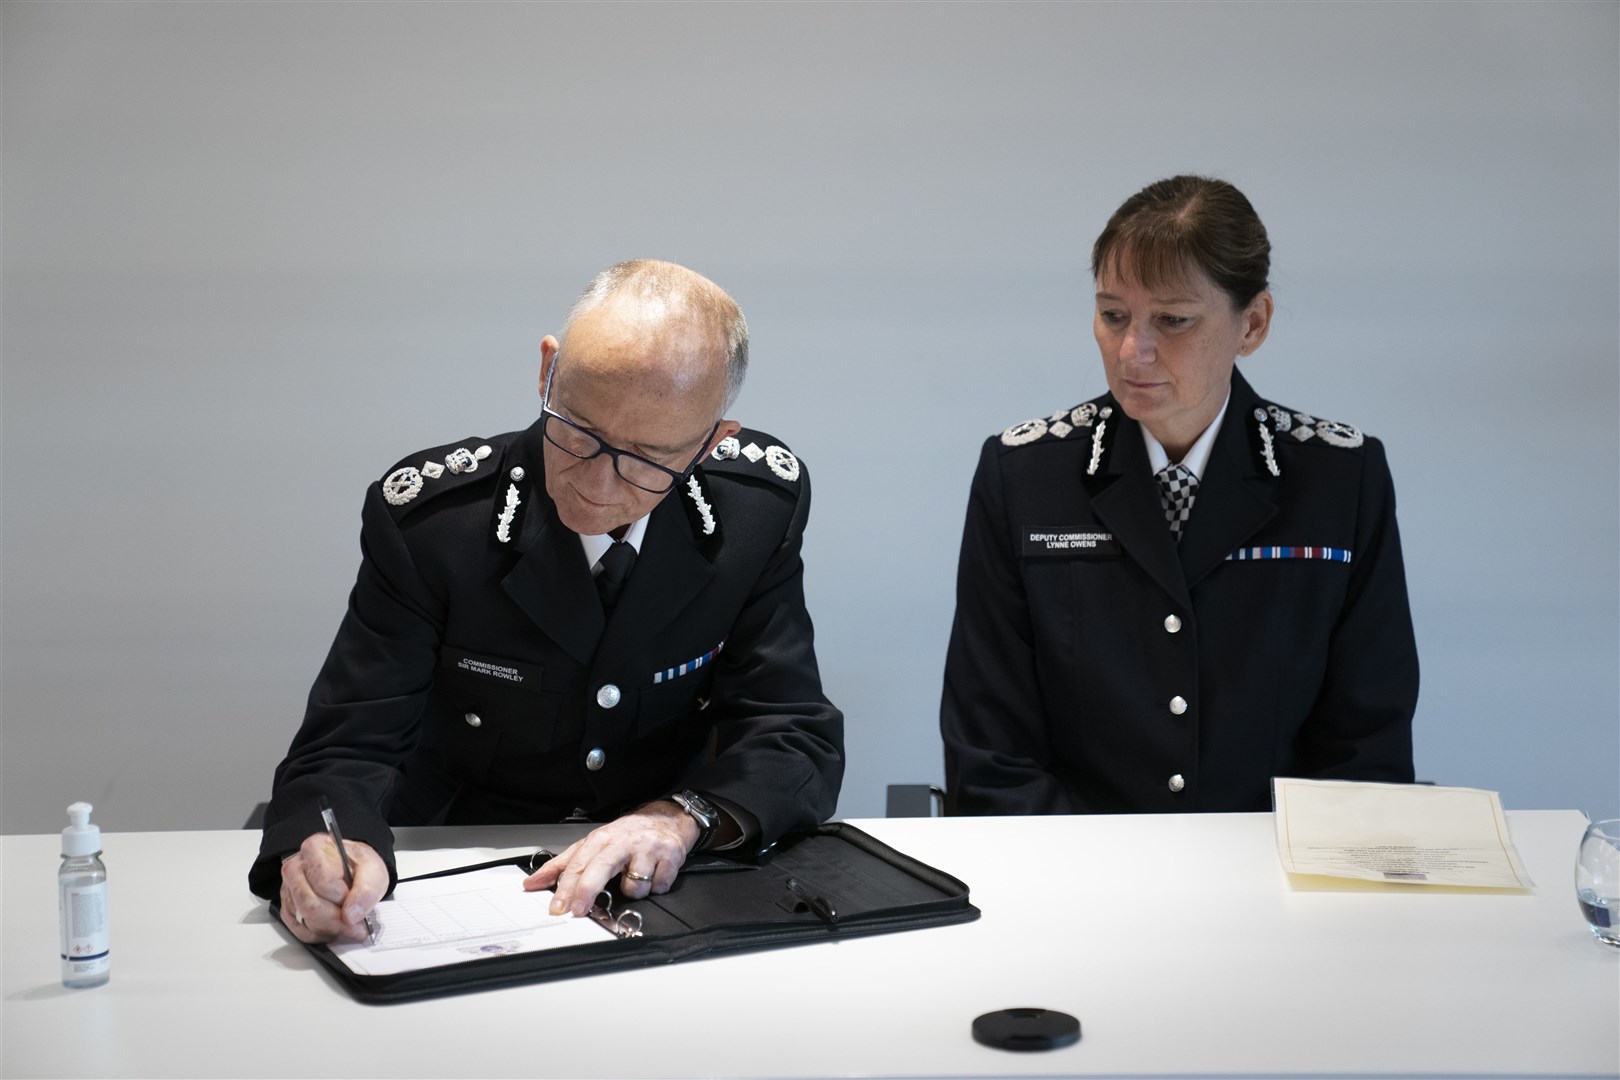 Sir Mark Rowley and Deputy Commissioner Lynne Owens sign the Warrant Register at New Scotland Yard (Kirsty O’Connor/PA)